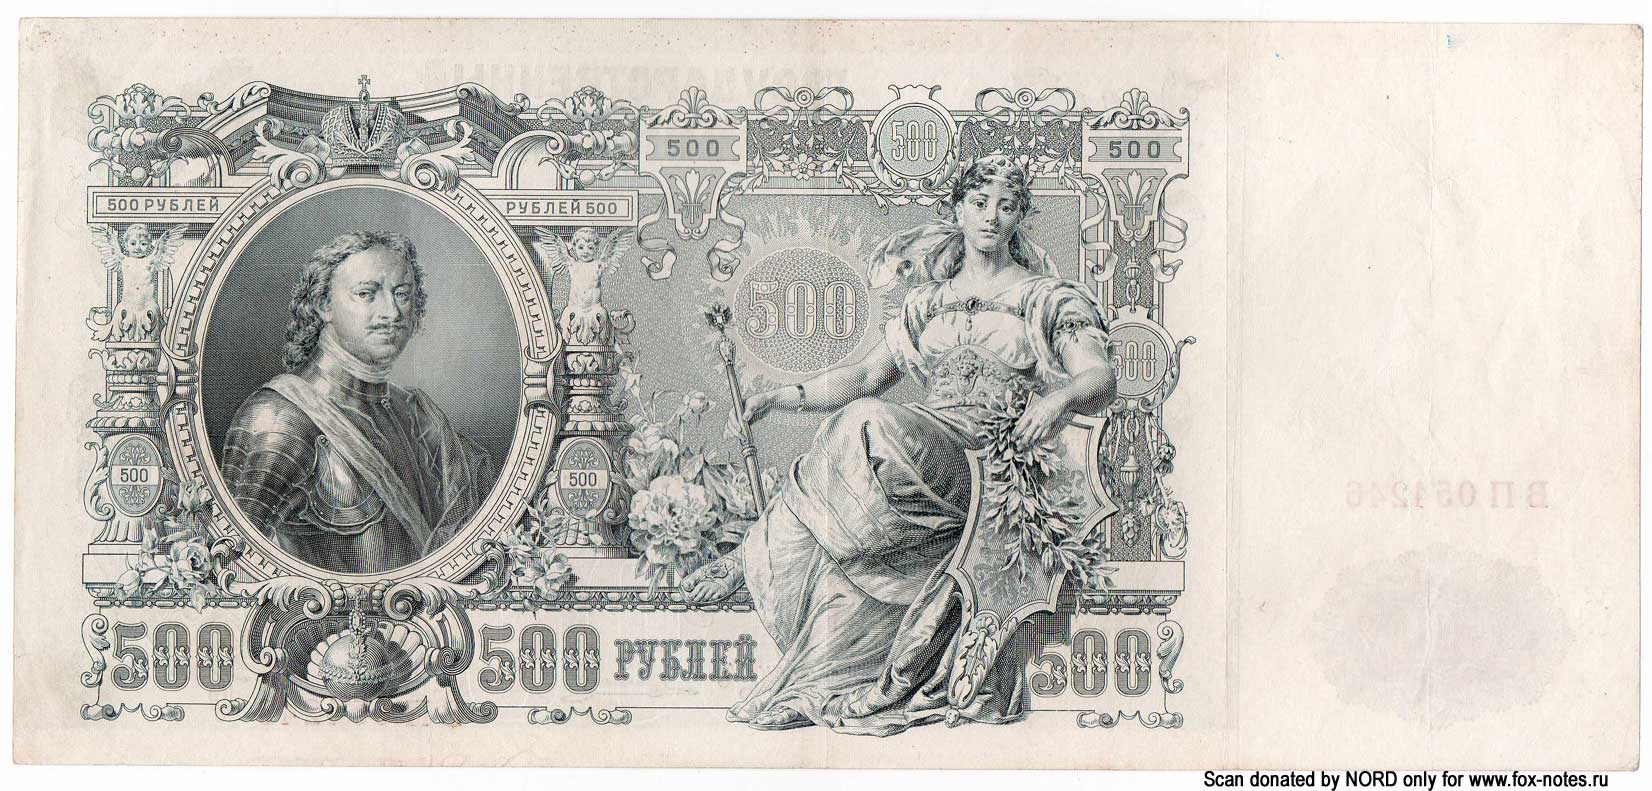 Russian Empire State Credit bank note 500 ruble 1912 Defective banknote